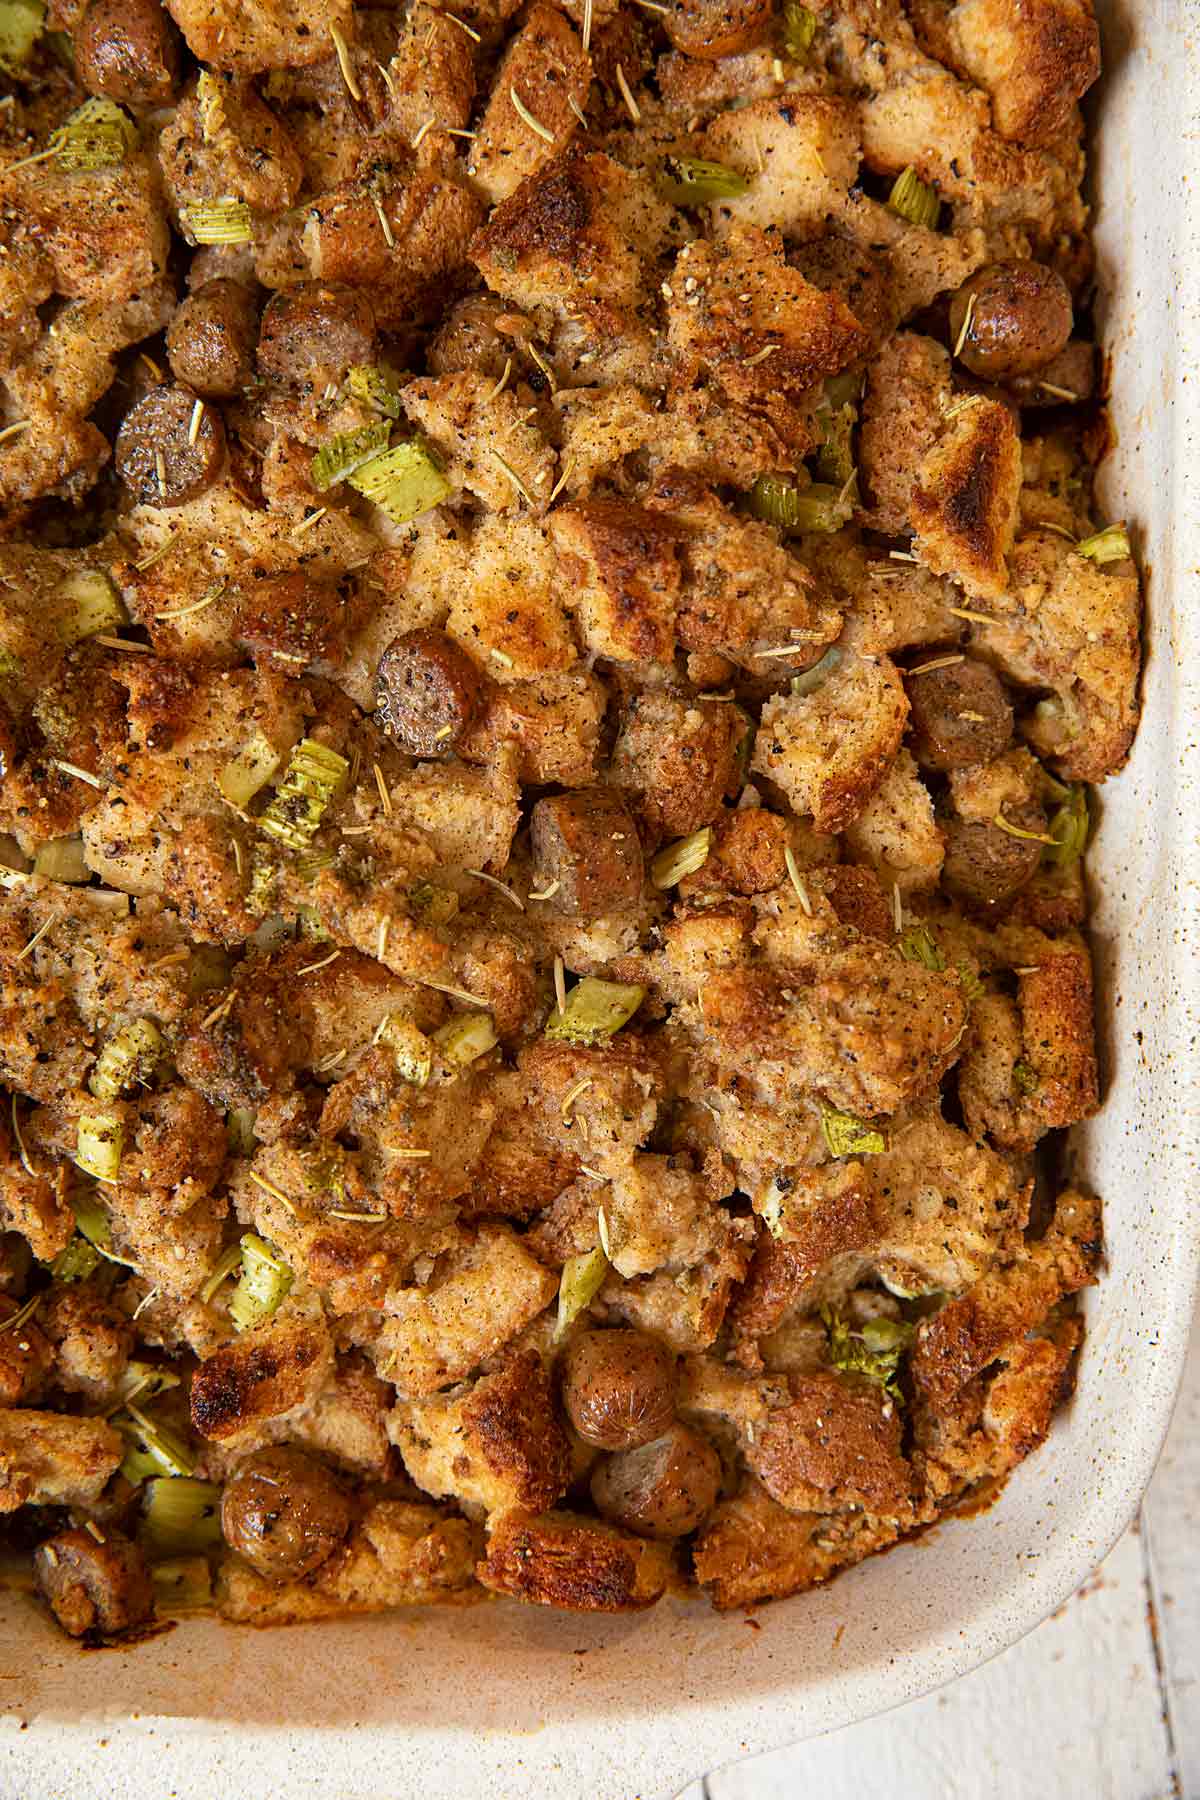 Whole Wheat Chicken Sausage Stuffing Recipe - Cooking Made Healthy